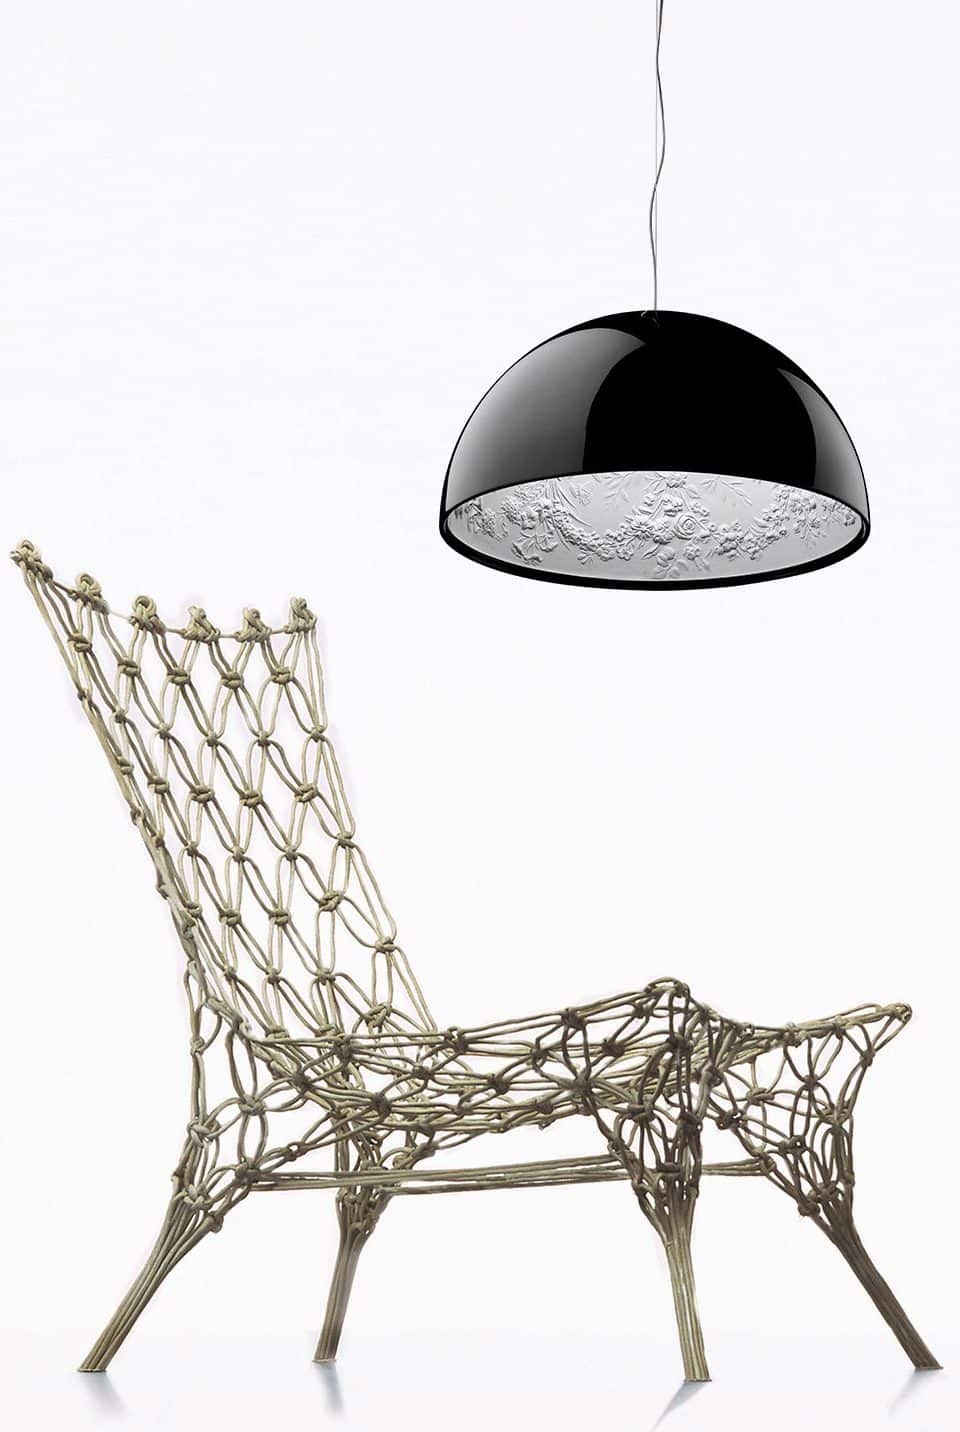 Marcel Wanders Thinks Design Should Be Playful, Romantic and Surreal